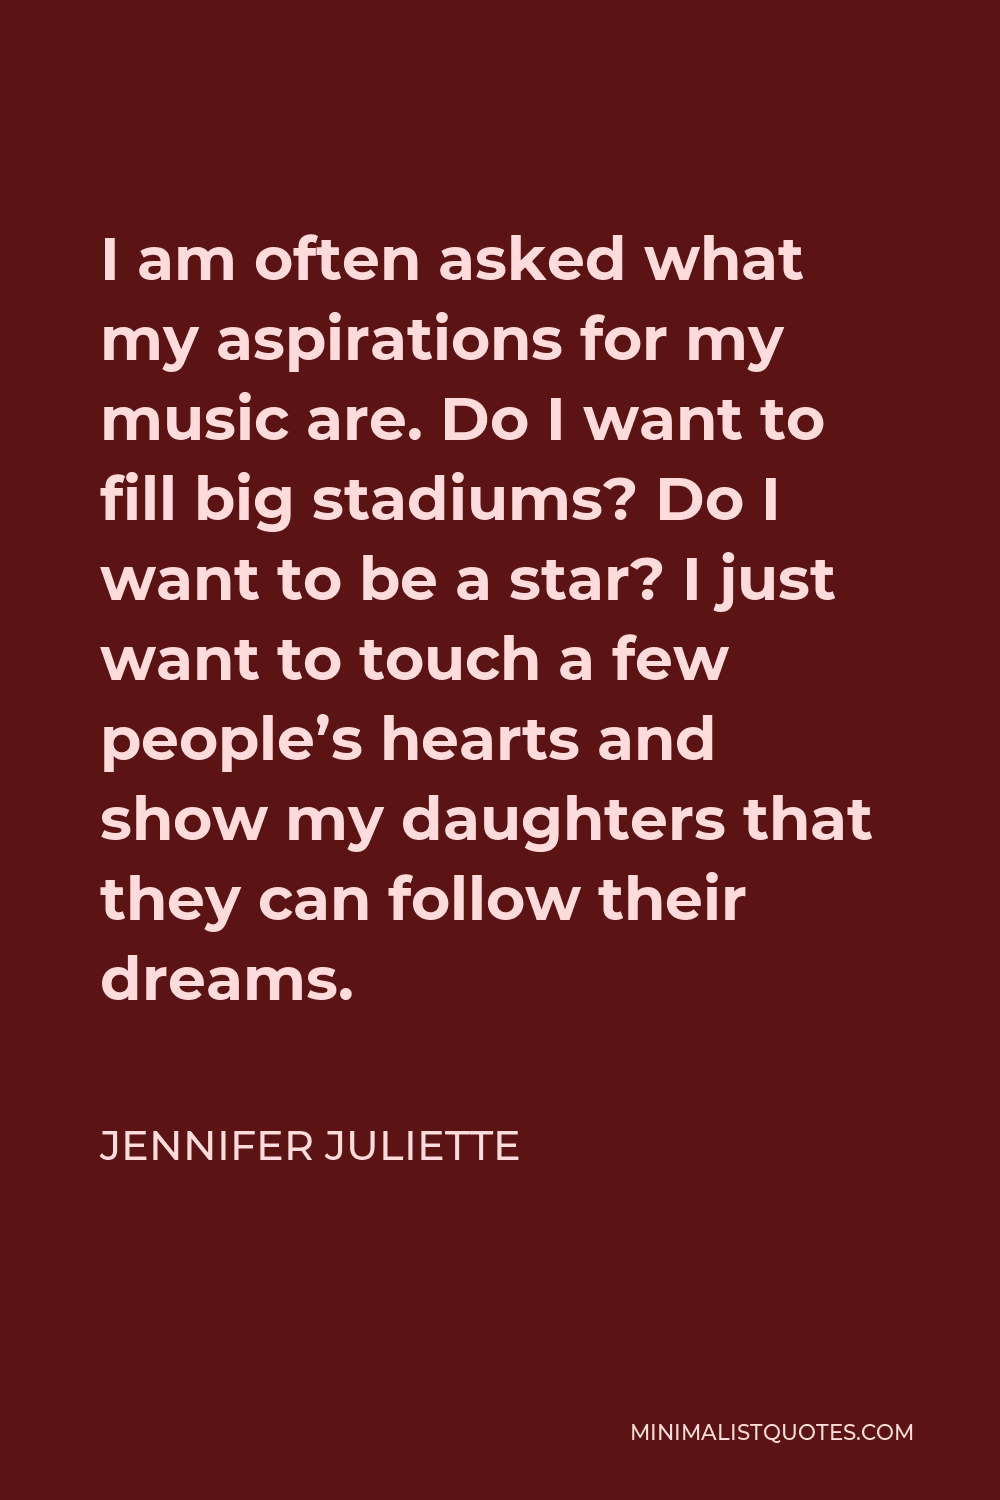 Jennifer Juliette Quote - I am often asked what my aspirations for my music are. Do I want to fill big stadiums? Do I want to be a star? I just want to touch a few people’s hearts and show my daughters that they can follow their dreams.